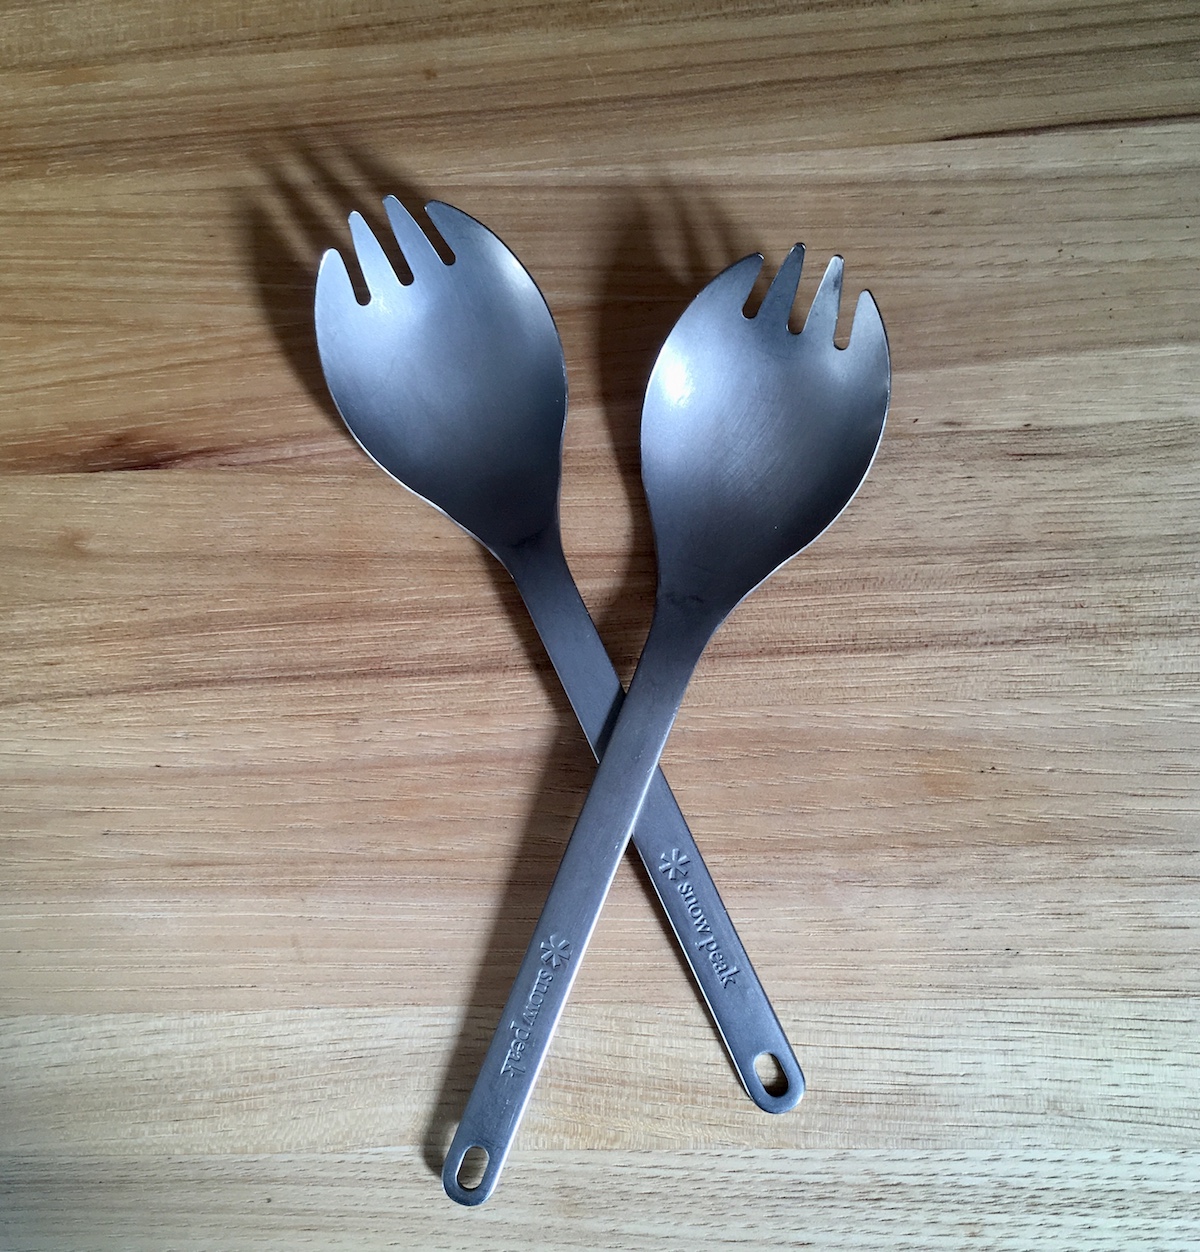 Snow Peak Sporks: Two sporks, crossed over one another, on a wooden background